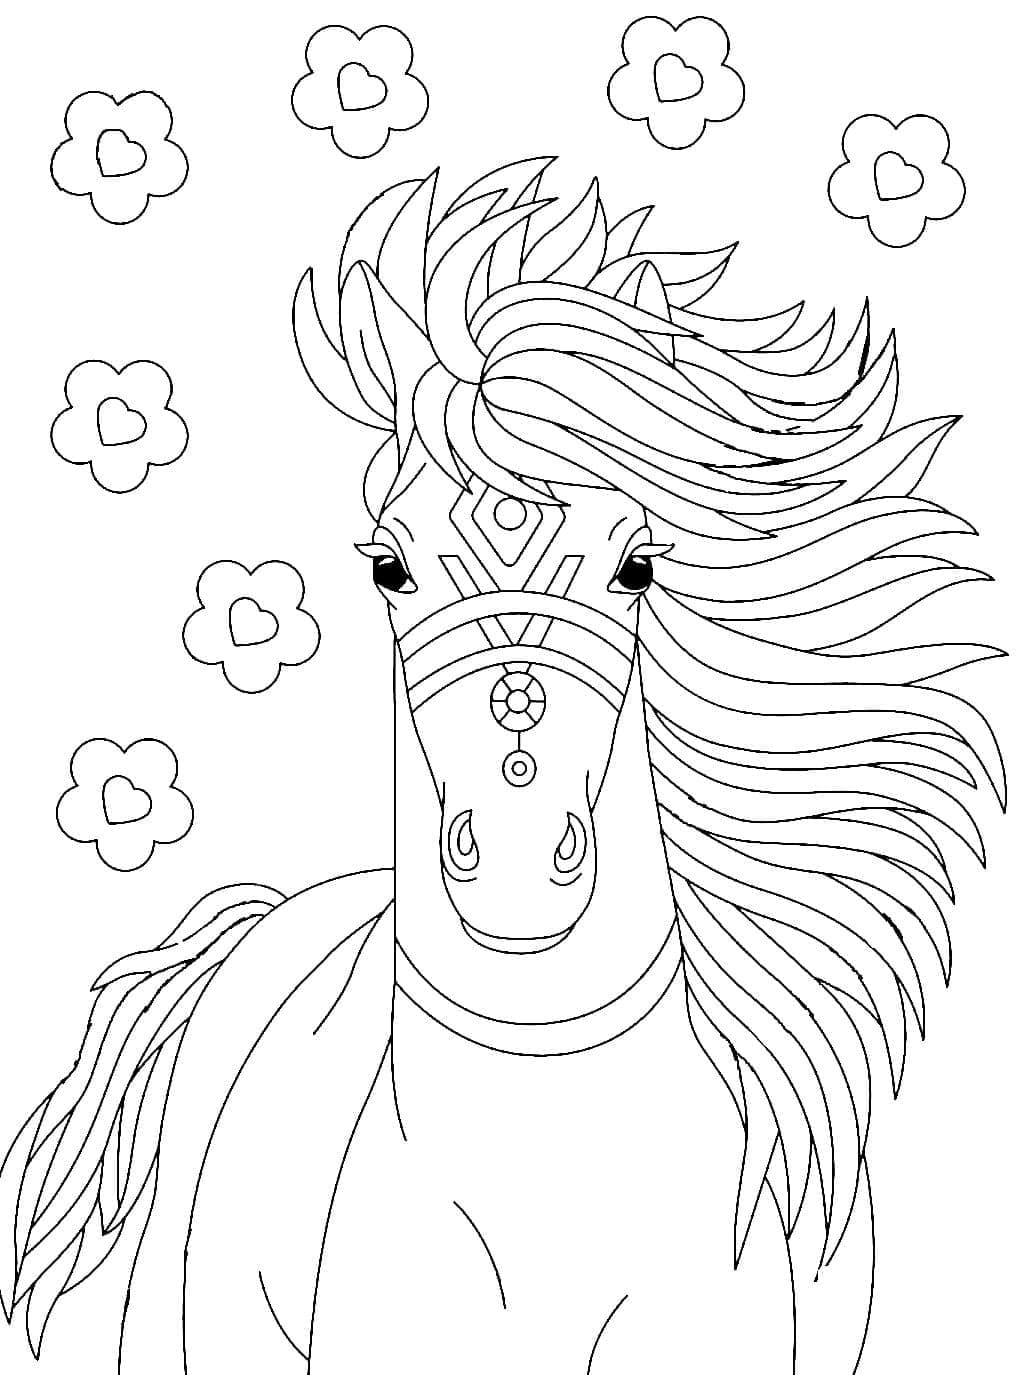 Beau Cheval coloring page